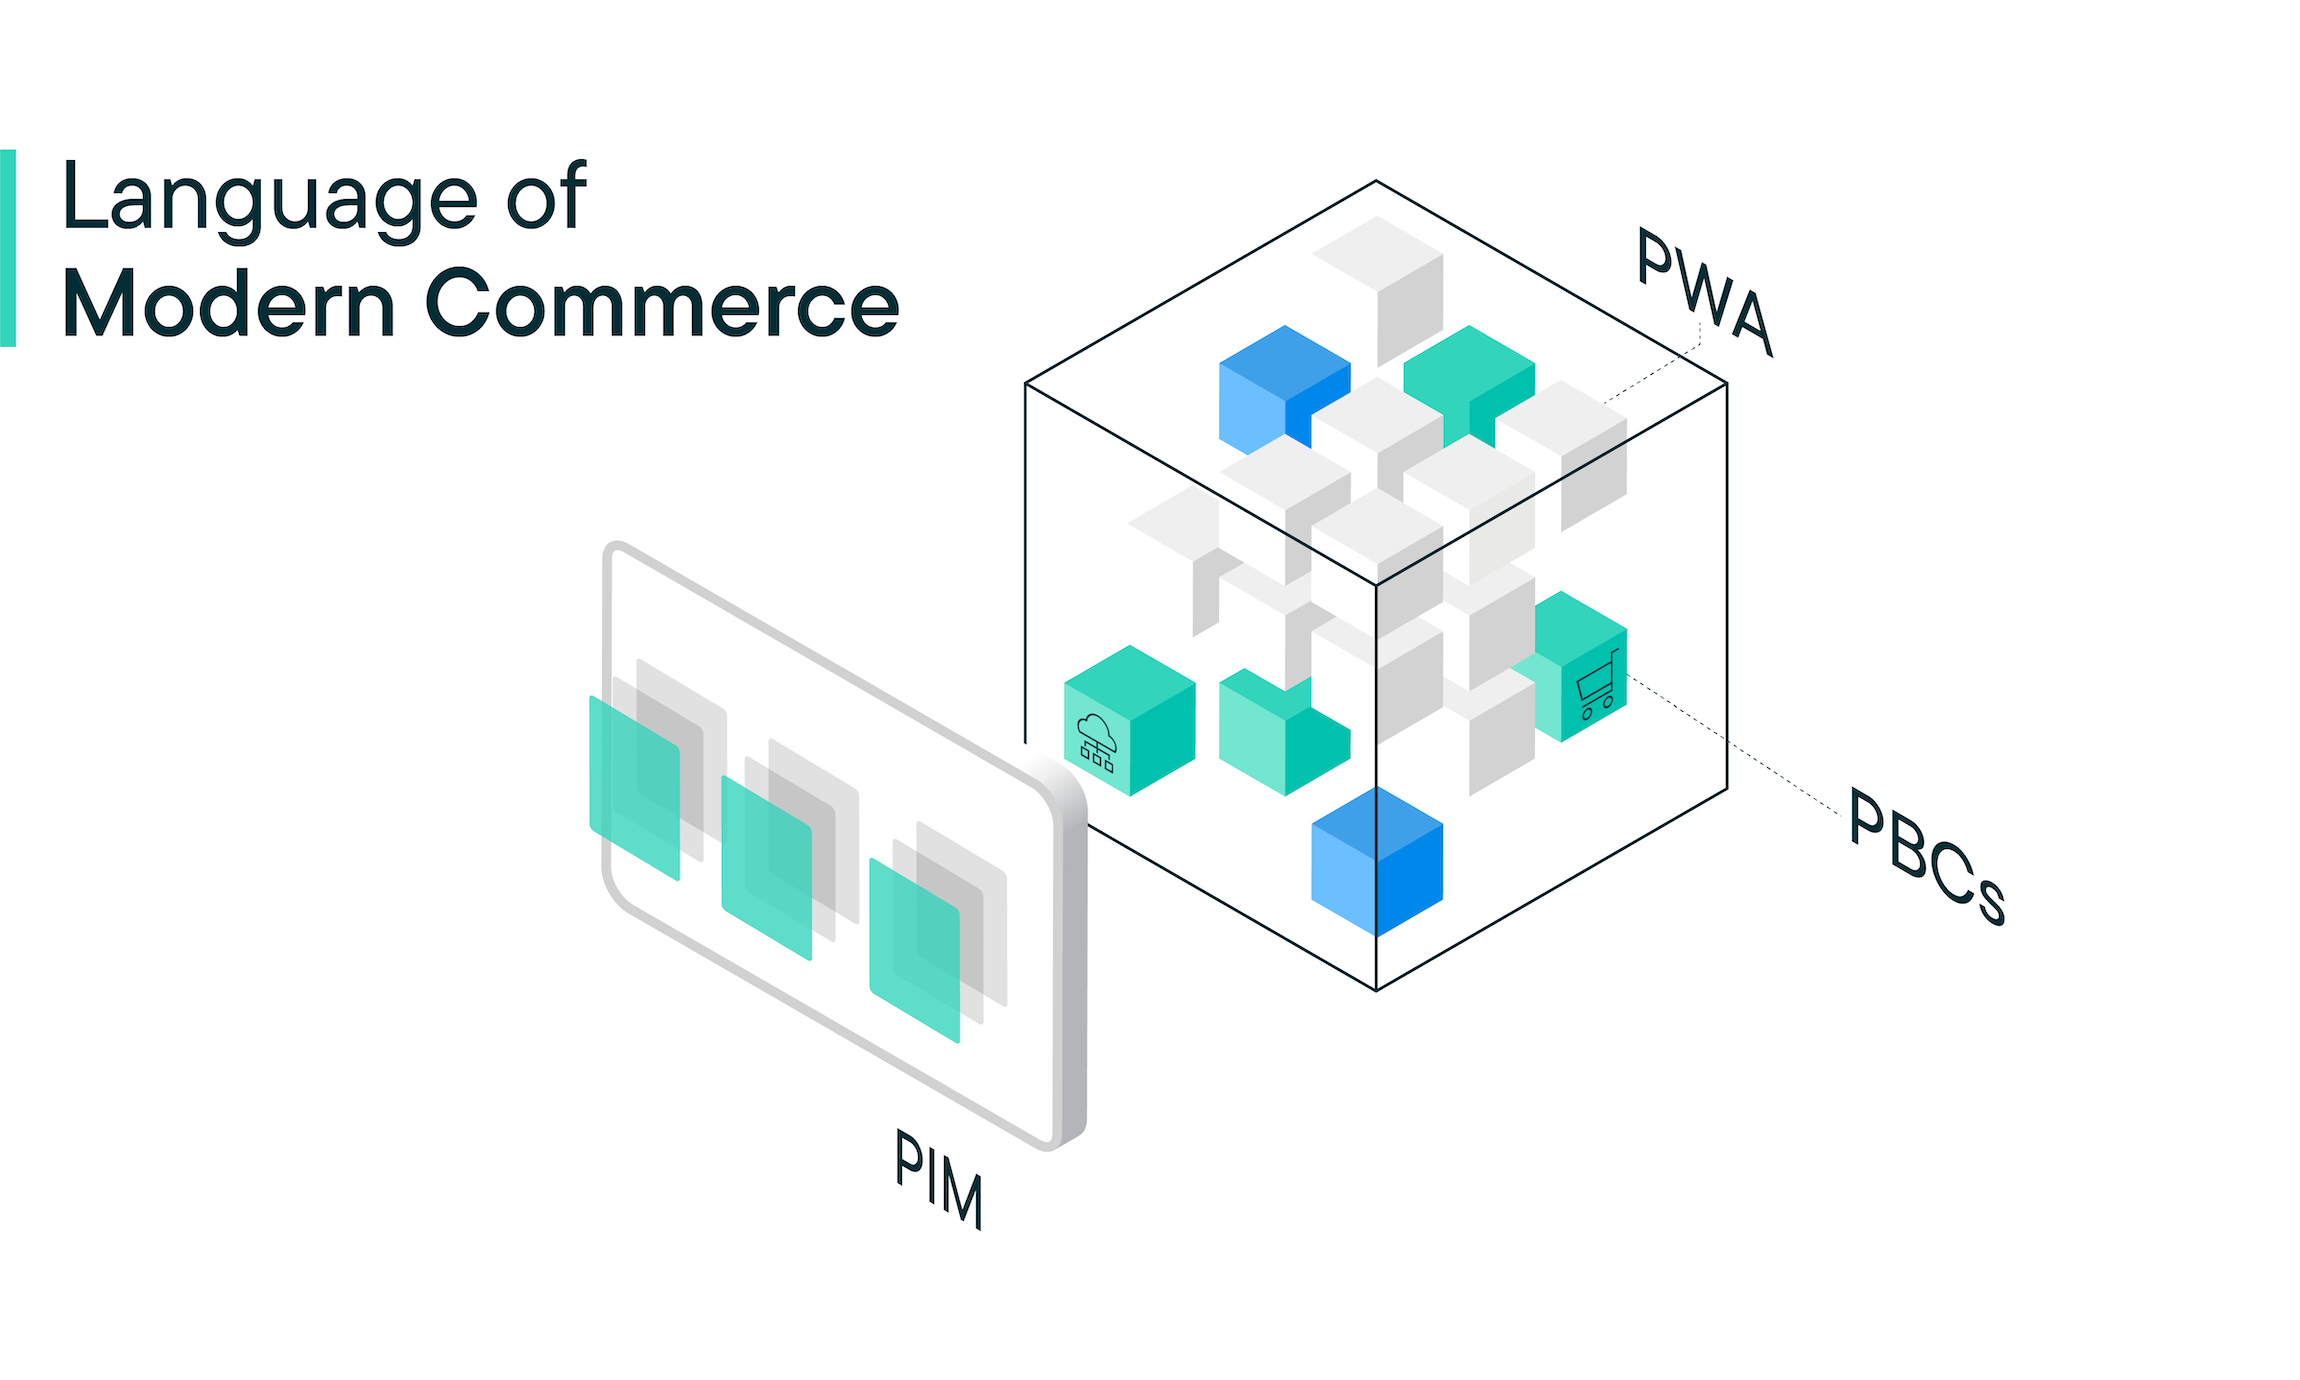 How understanding Packaged Business Capabilities (PBCs), Progressive Web Apps (PWA) and Product Information Management systems (PIM) can help you navigate your digital future